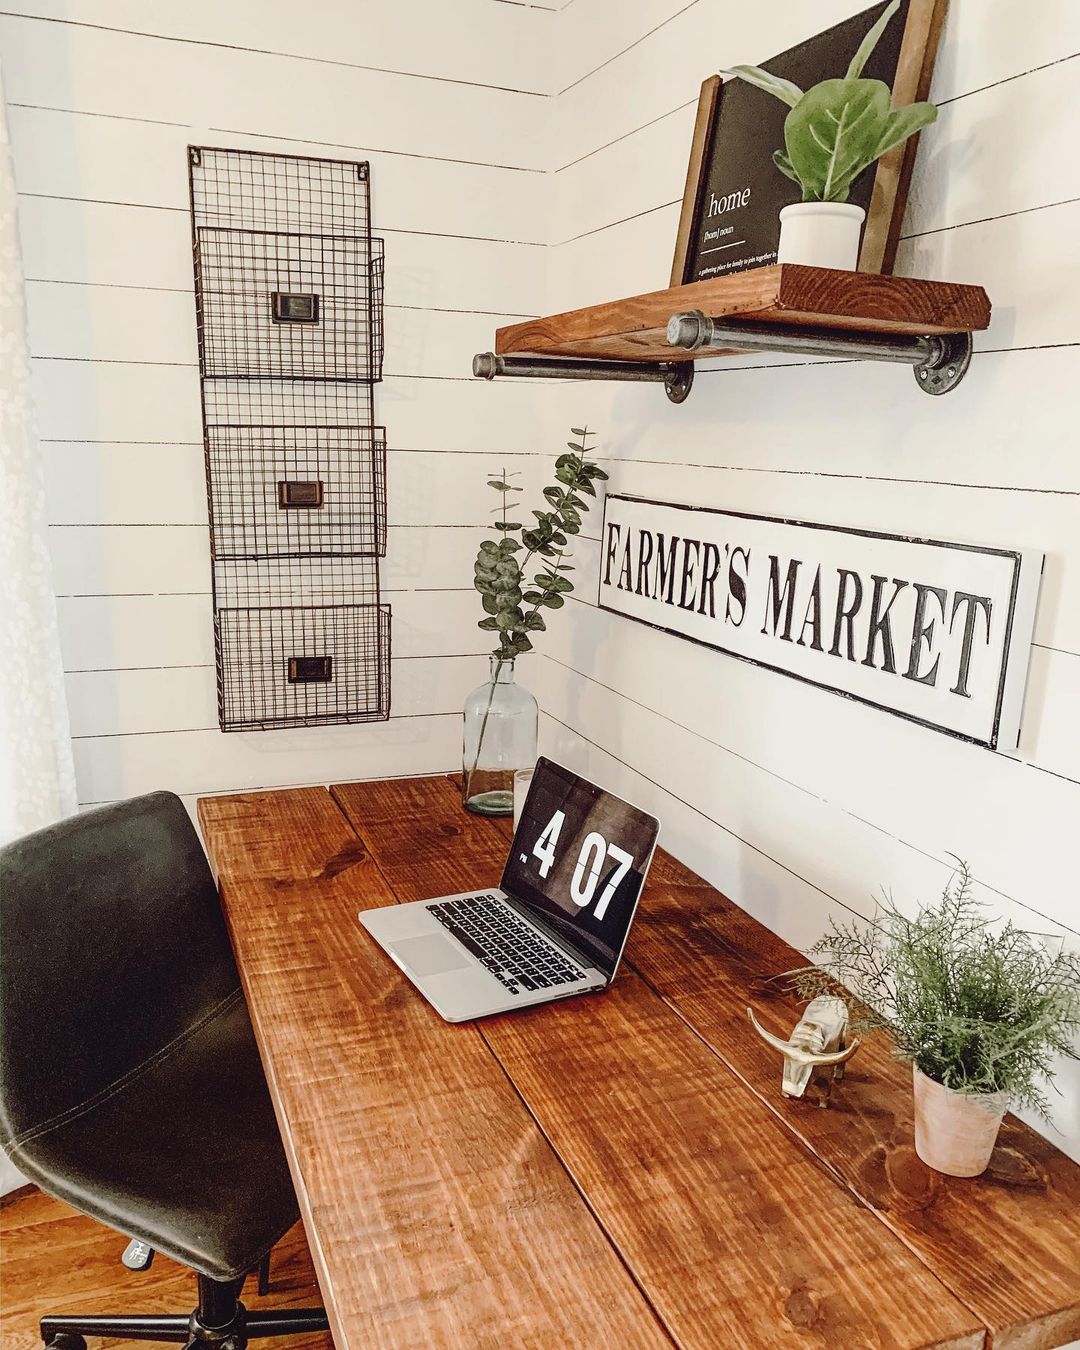 Use Shiplap Walls and Reclaimed Wood for a Rustic Office Nook